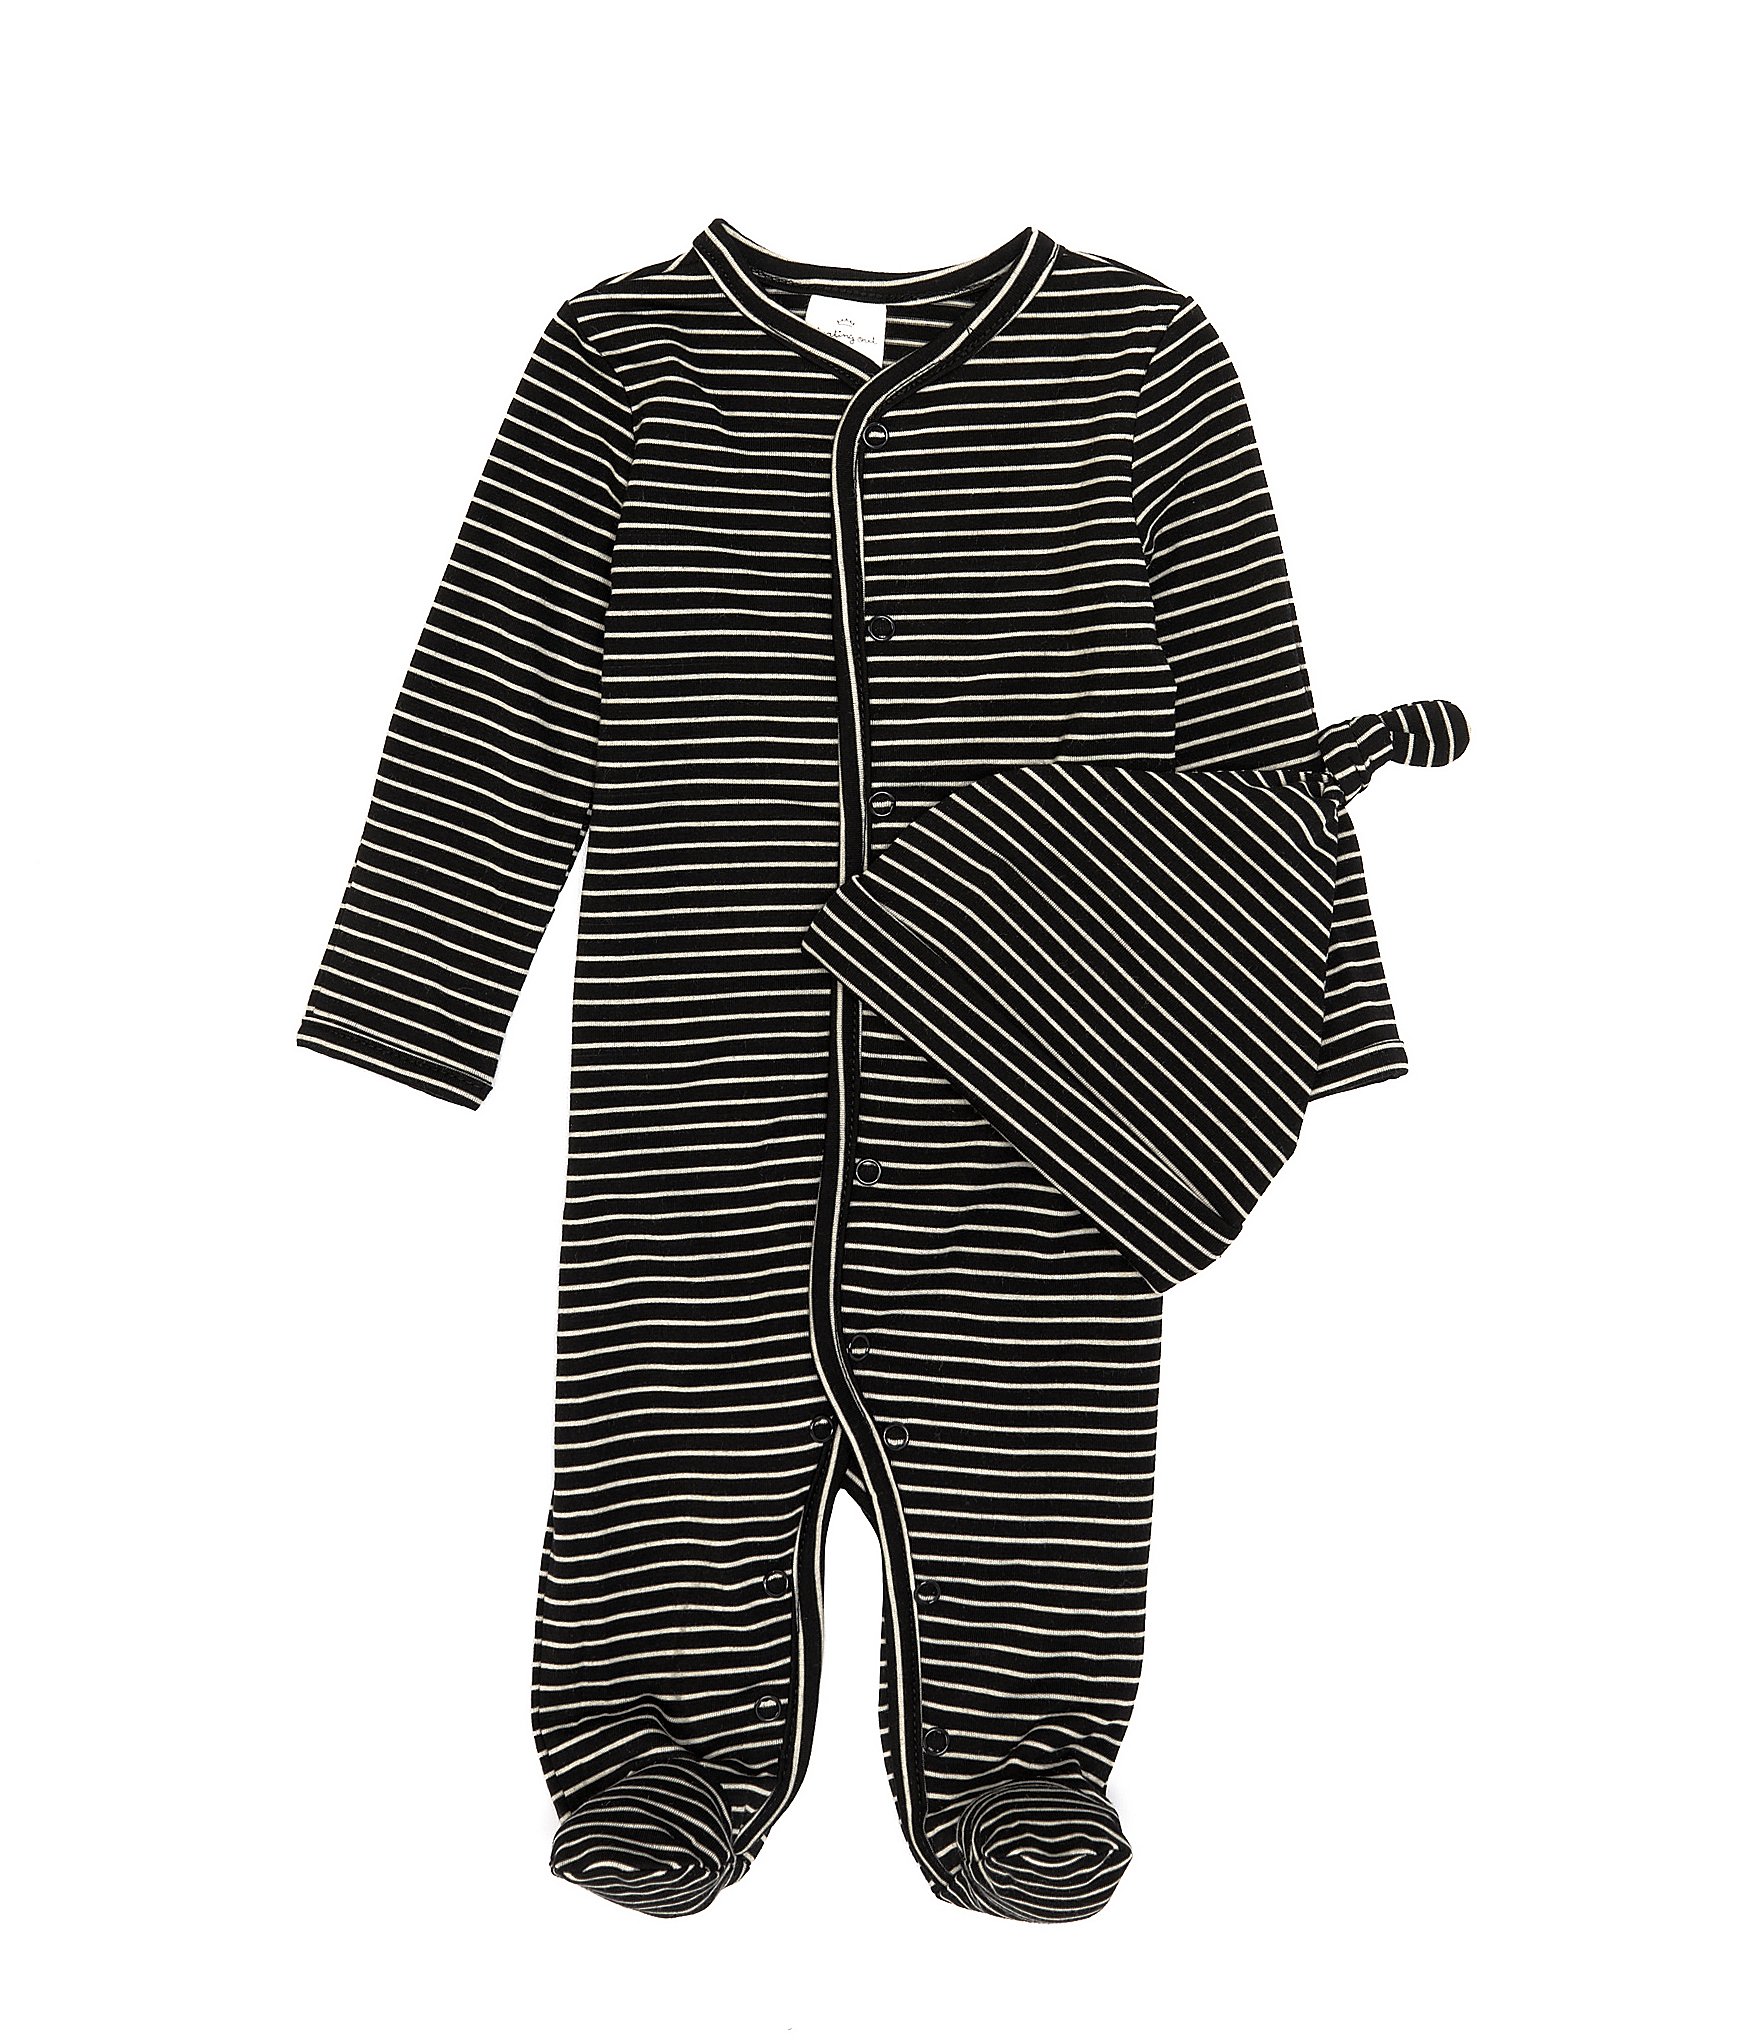 Starting Out Baby Boy Newborn - 6 Months Black Stripe Coverall Set ...